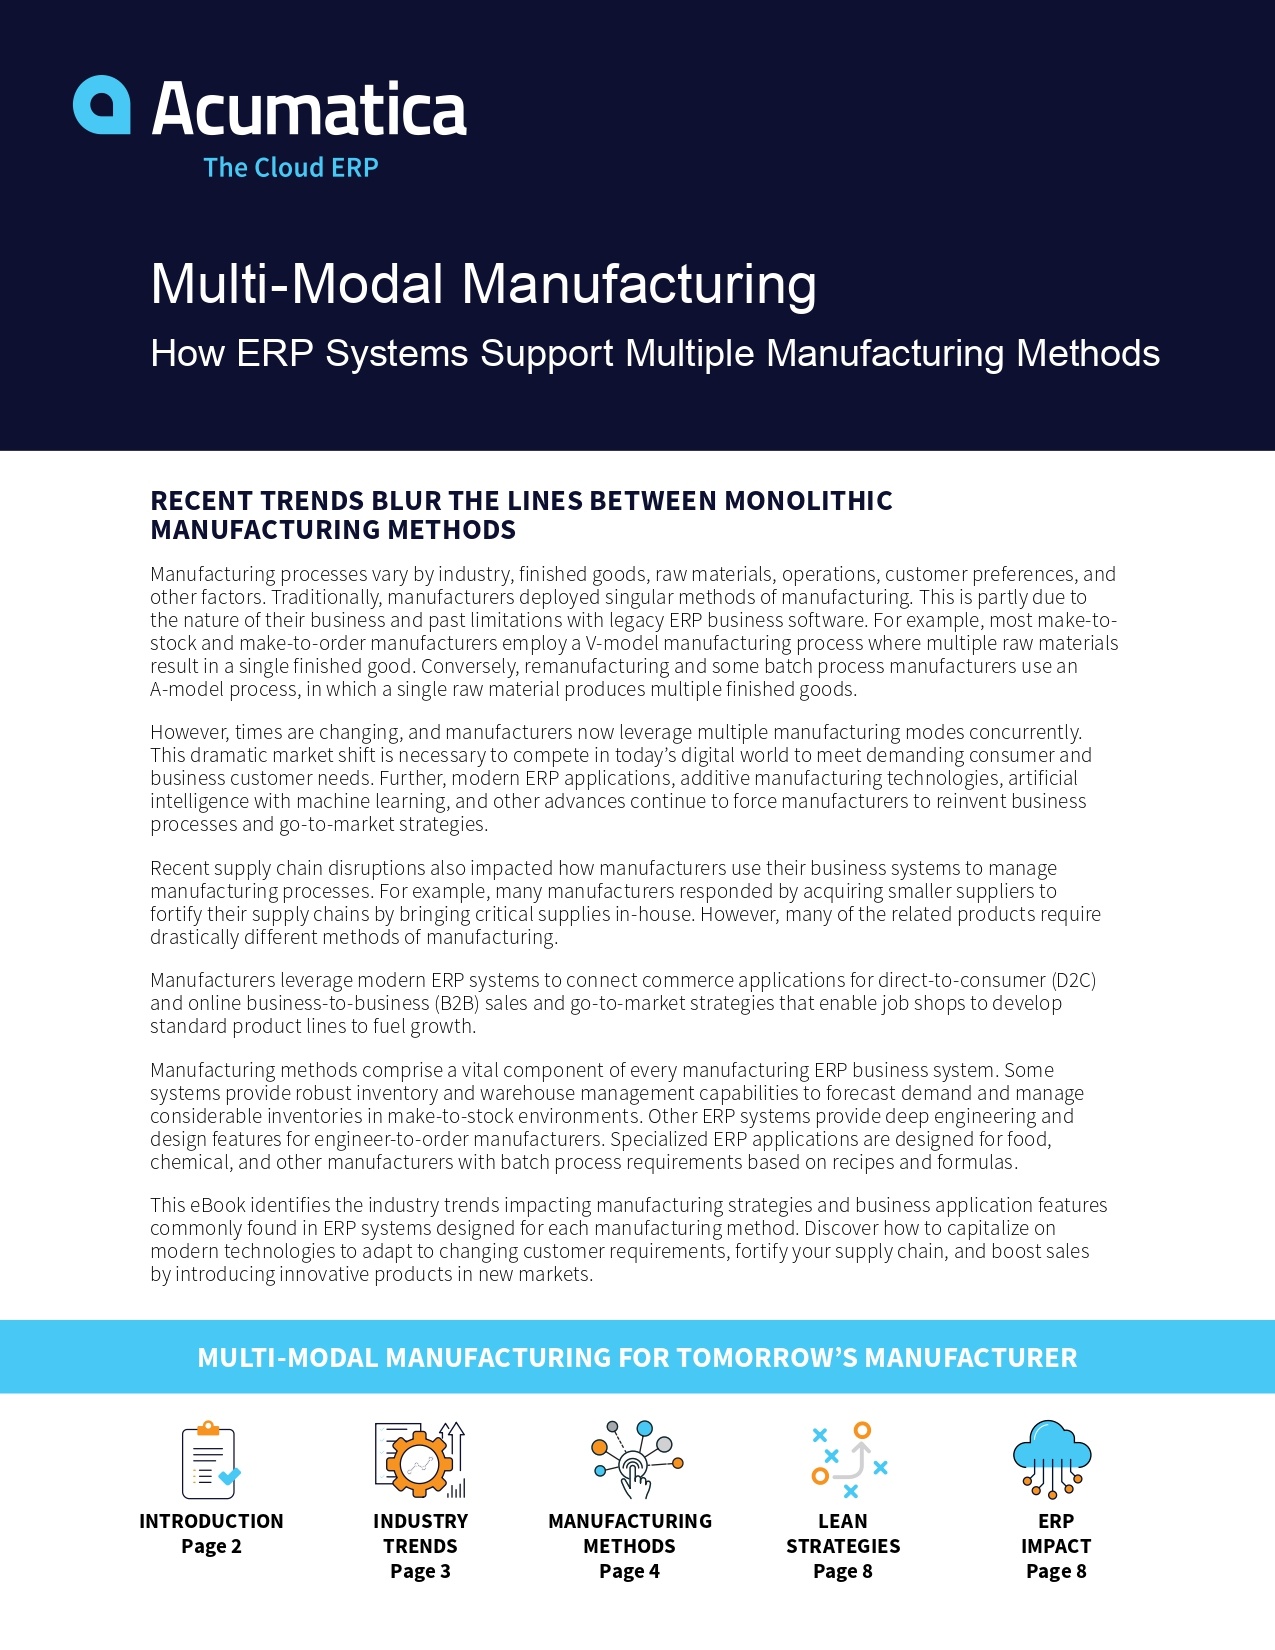 Modern ERP Systems Say “No Problem” When Faced with Multi-Modal Manufacturing Requirements